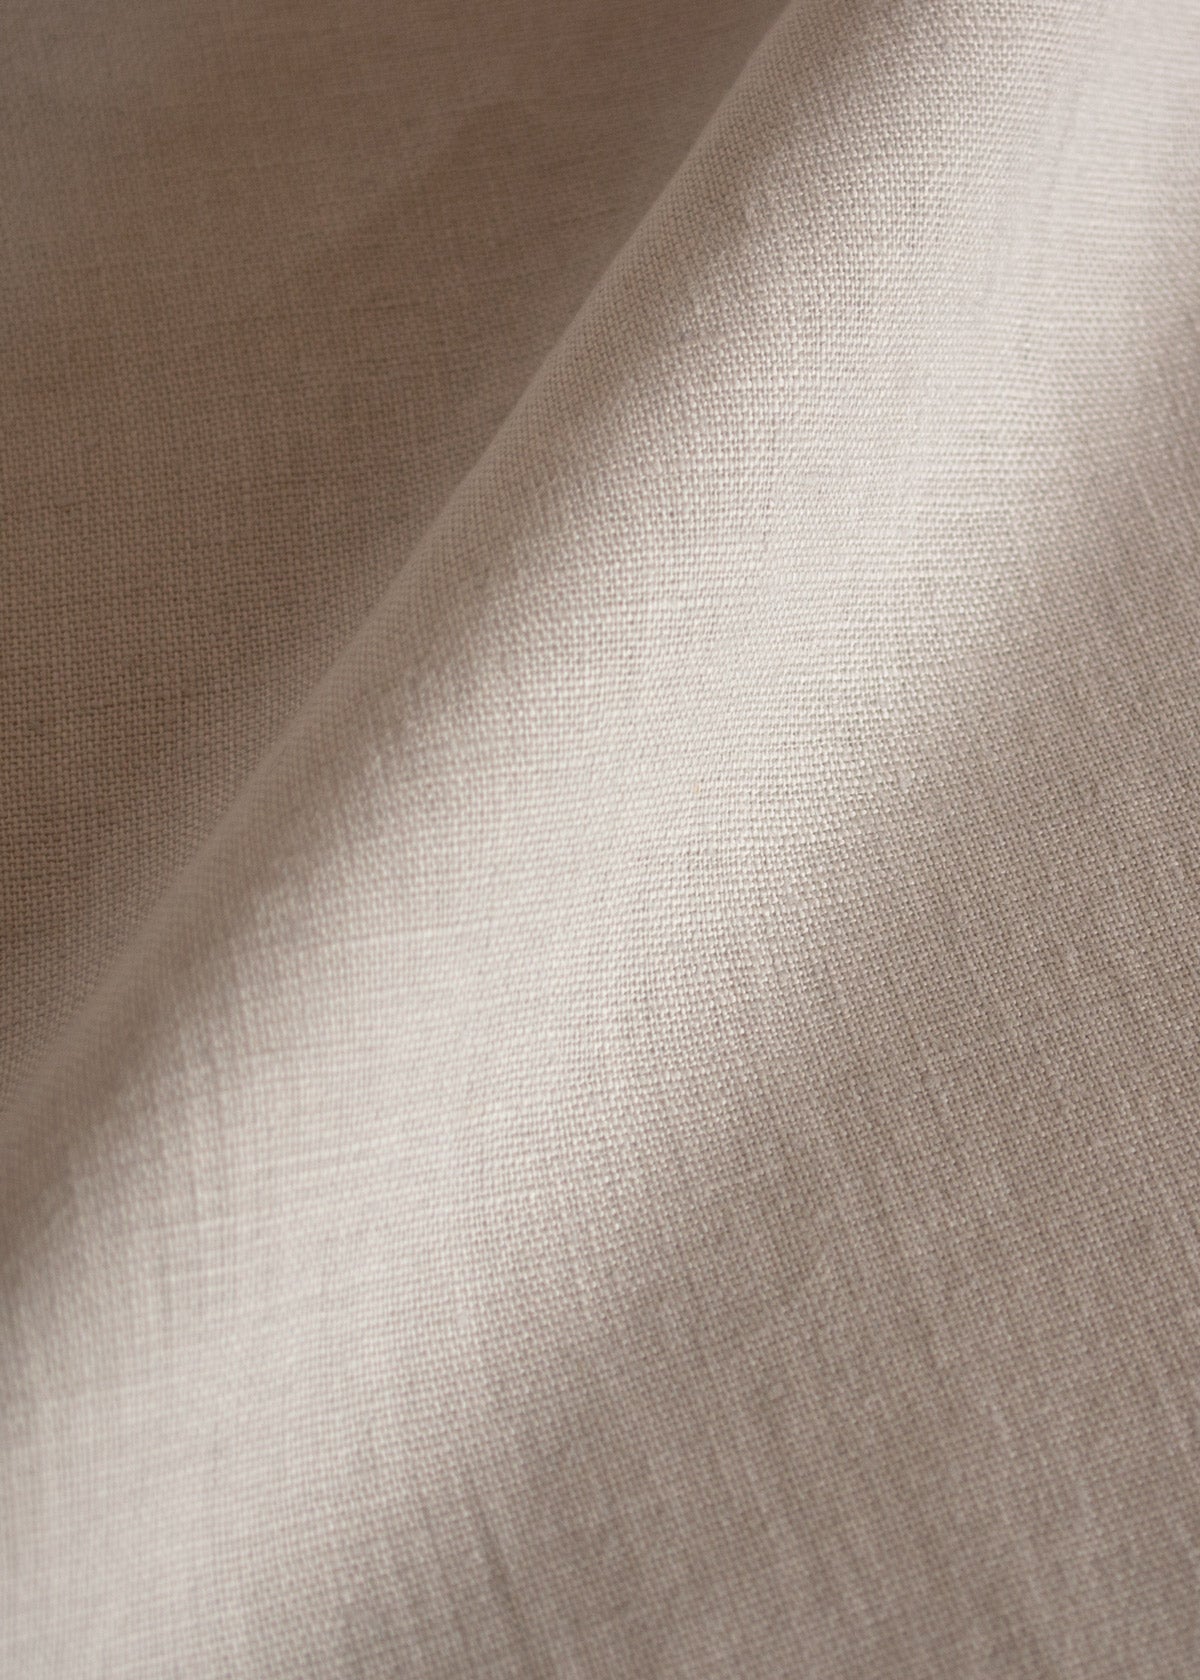 Luxuriously Soft and Ethically Made Linen Face Towel in Sand Dunes